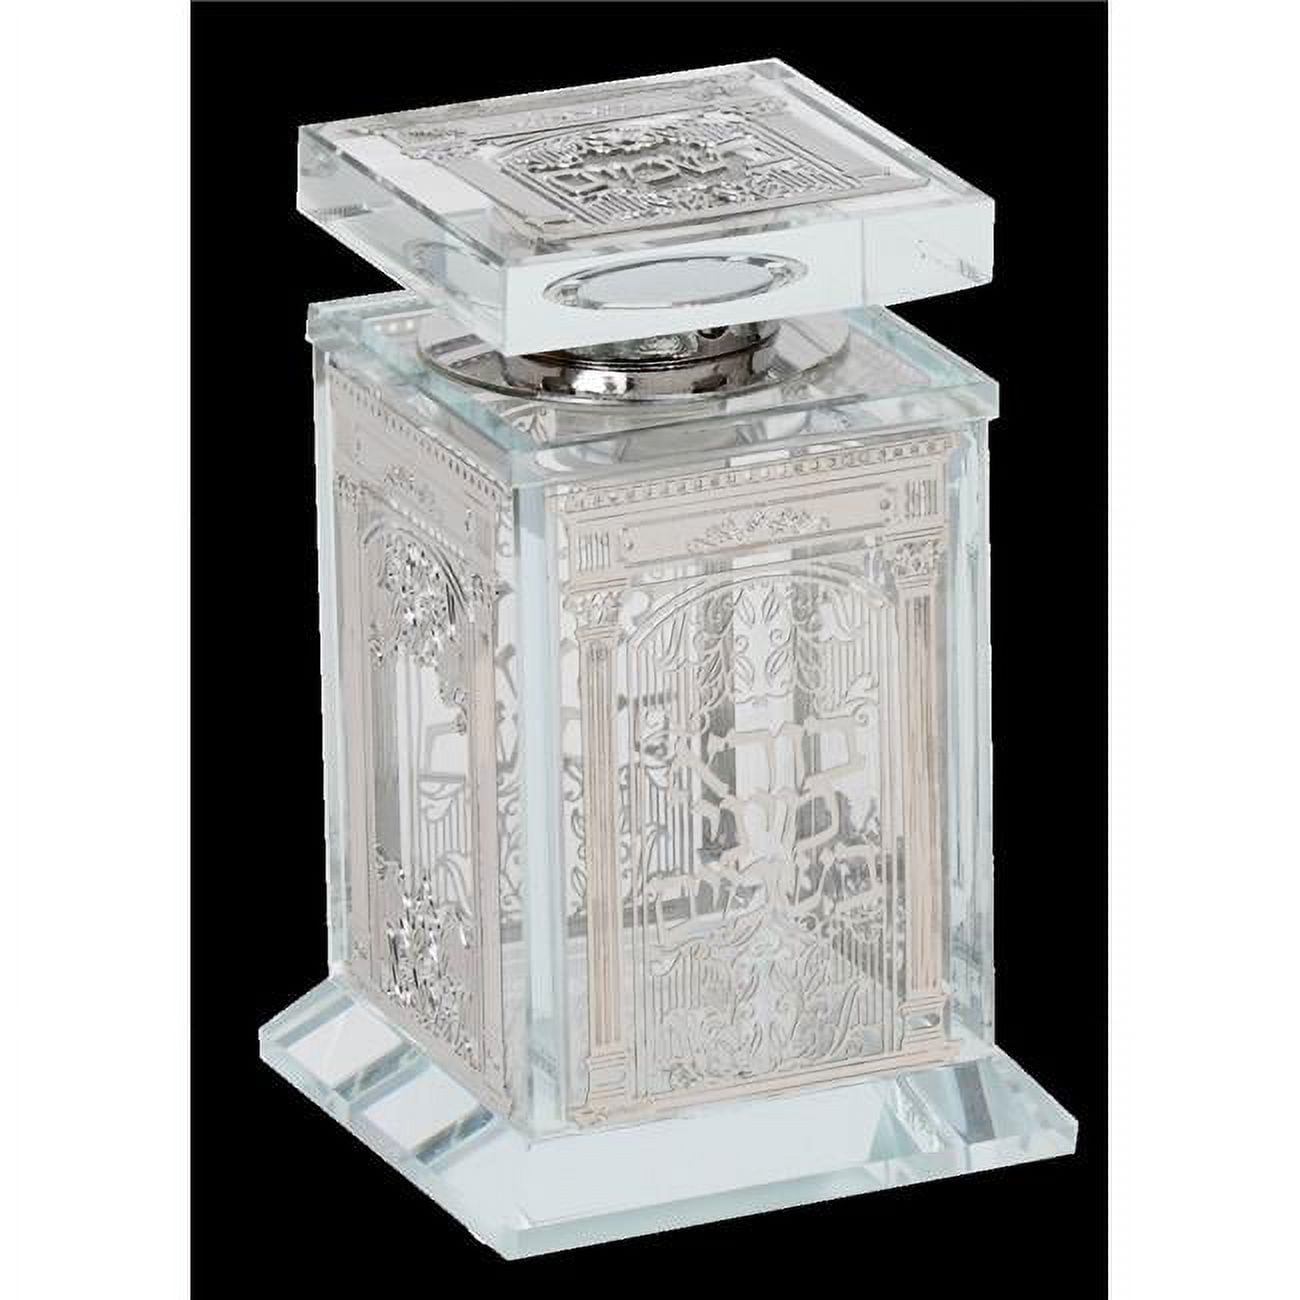 Picture of Schonfeld Collection 161016 2 x 2 x 4 in. Crystal Besomim Holder with Silver Plate